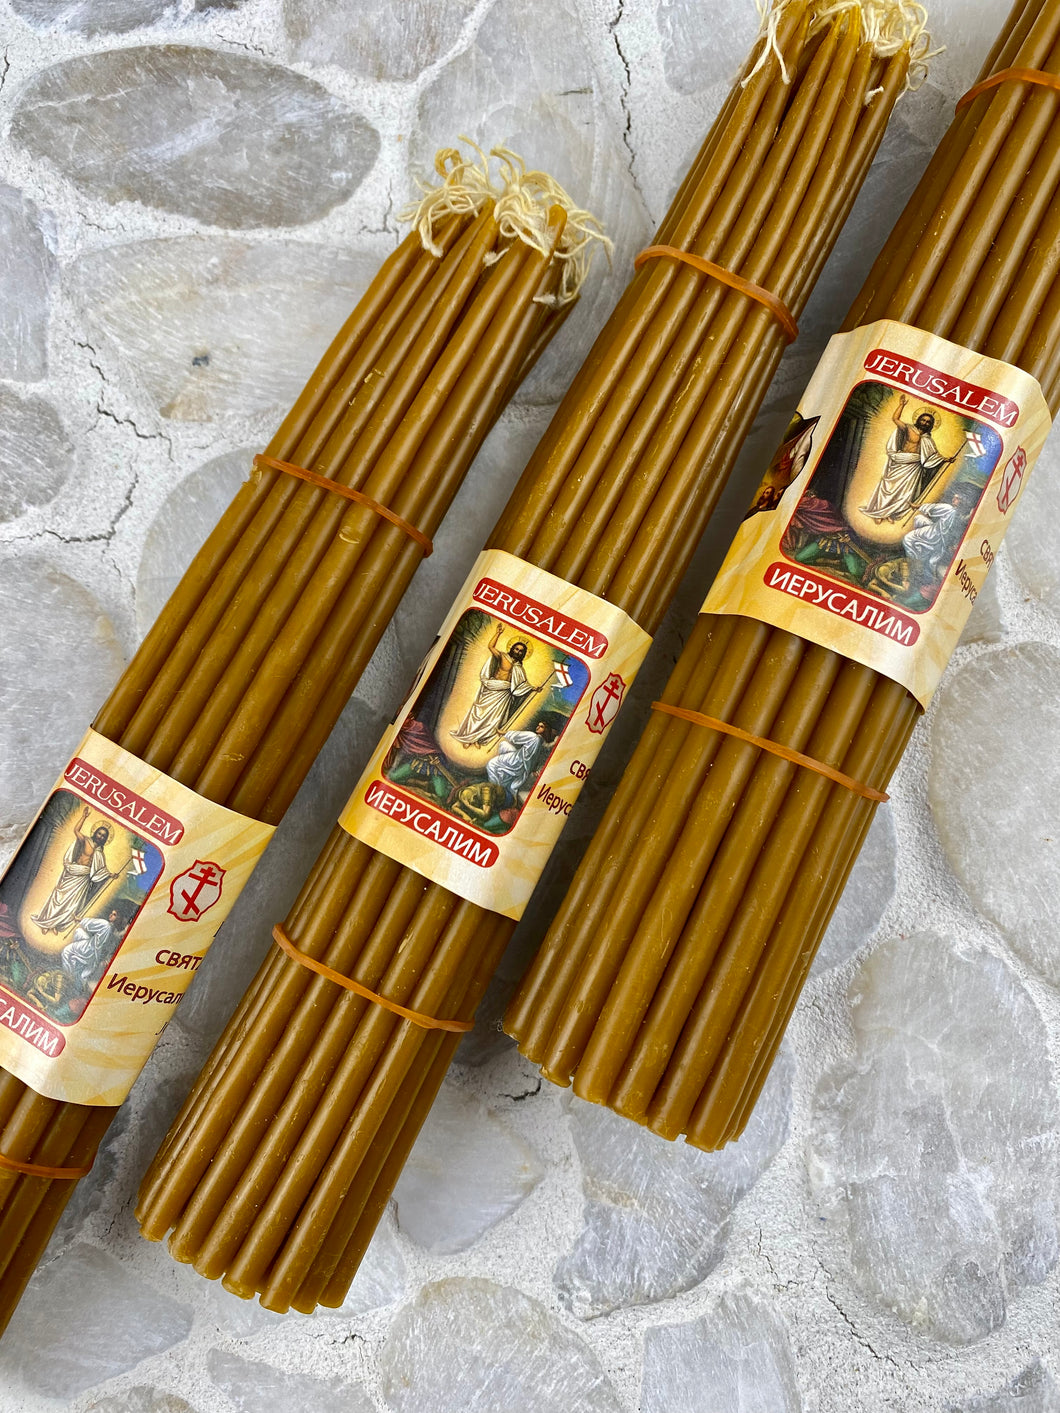 33 Honey Bee Wax Candles from the Holy Land, Blessed in the Holy Sepulchre Church, these Candles are Hand Made in Jerusalem. Bee Wax candles burn with an aromatic fragrance like that of honey. HC20226